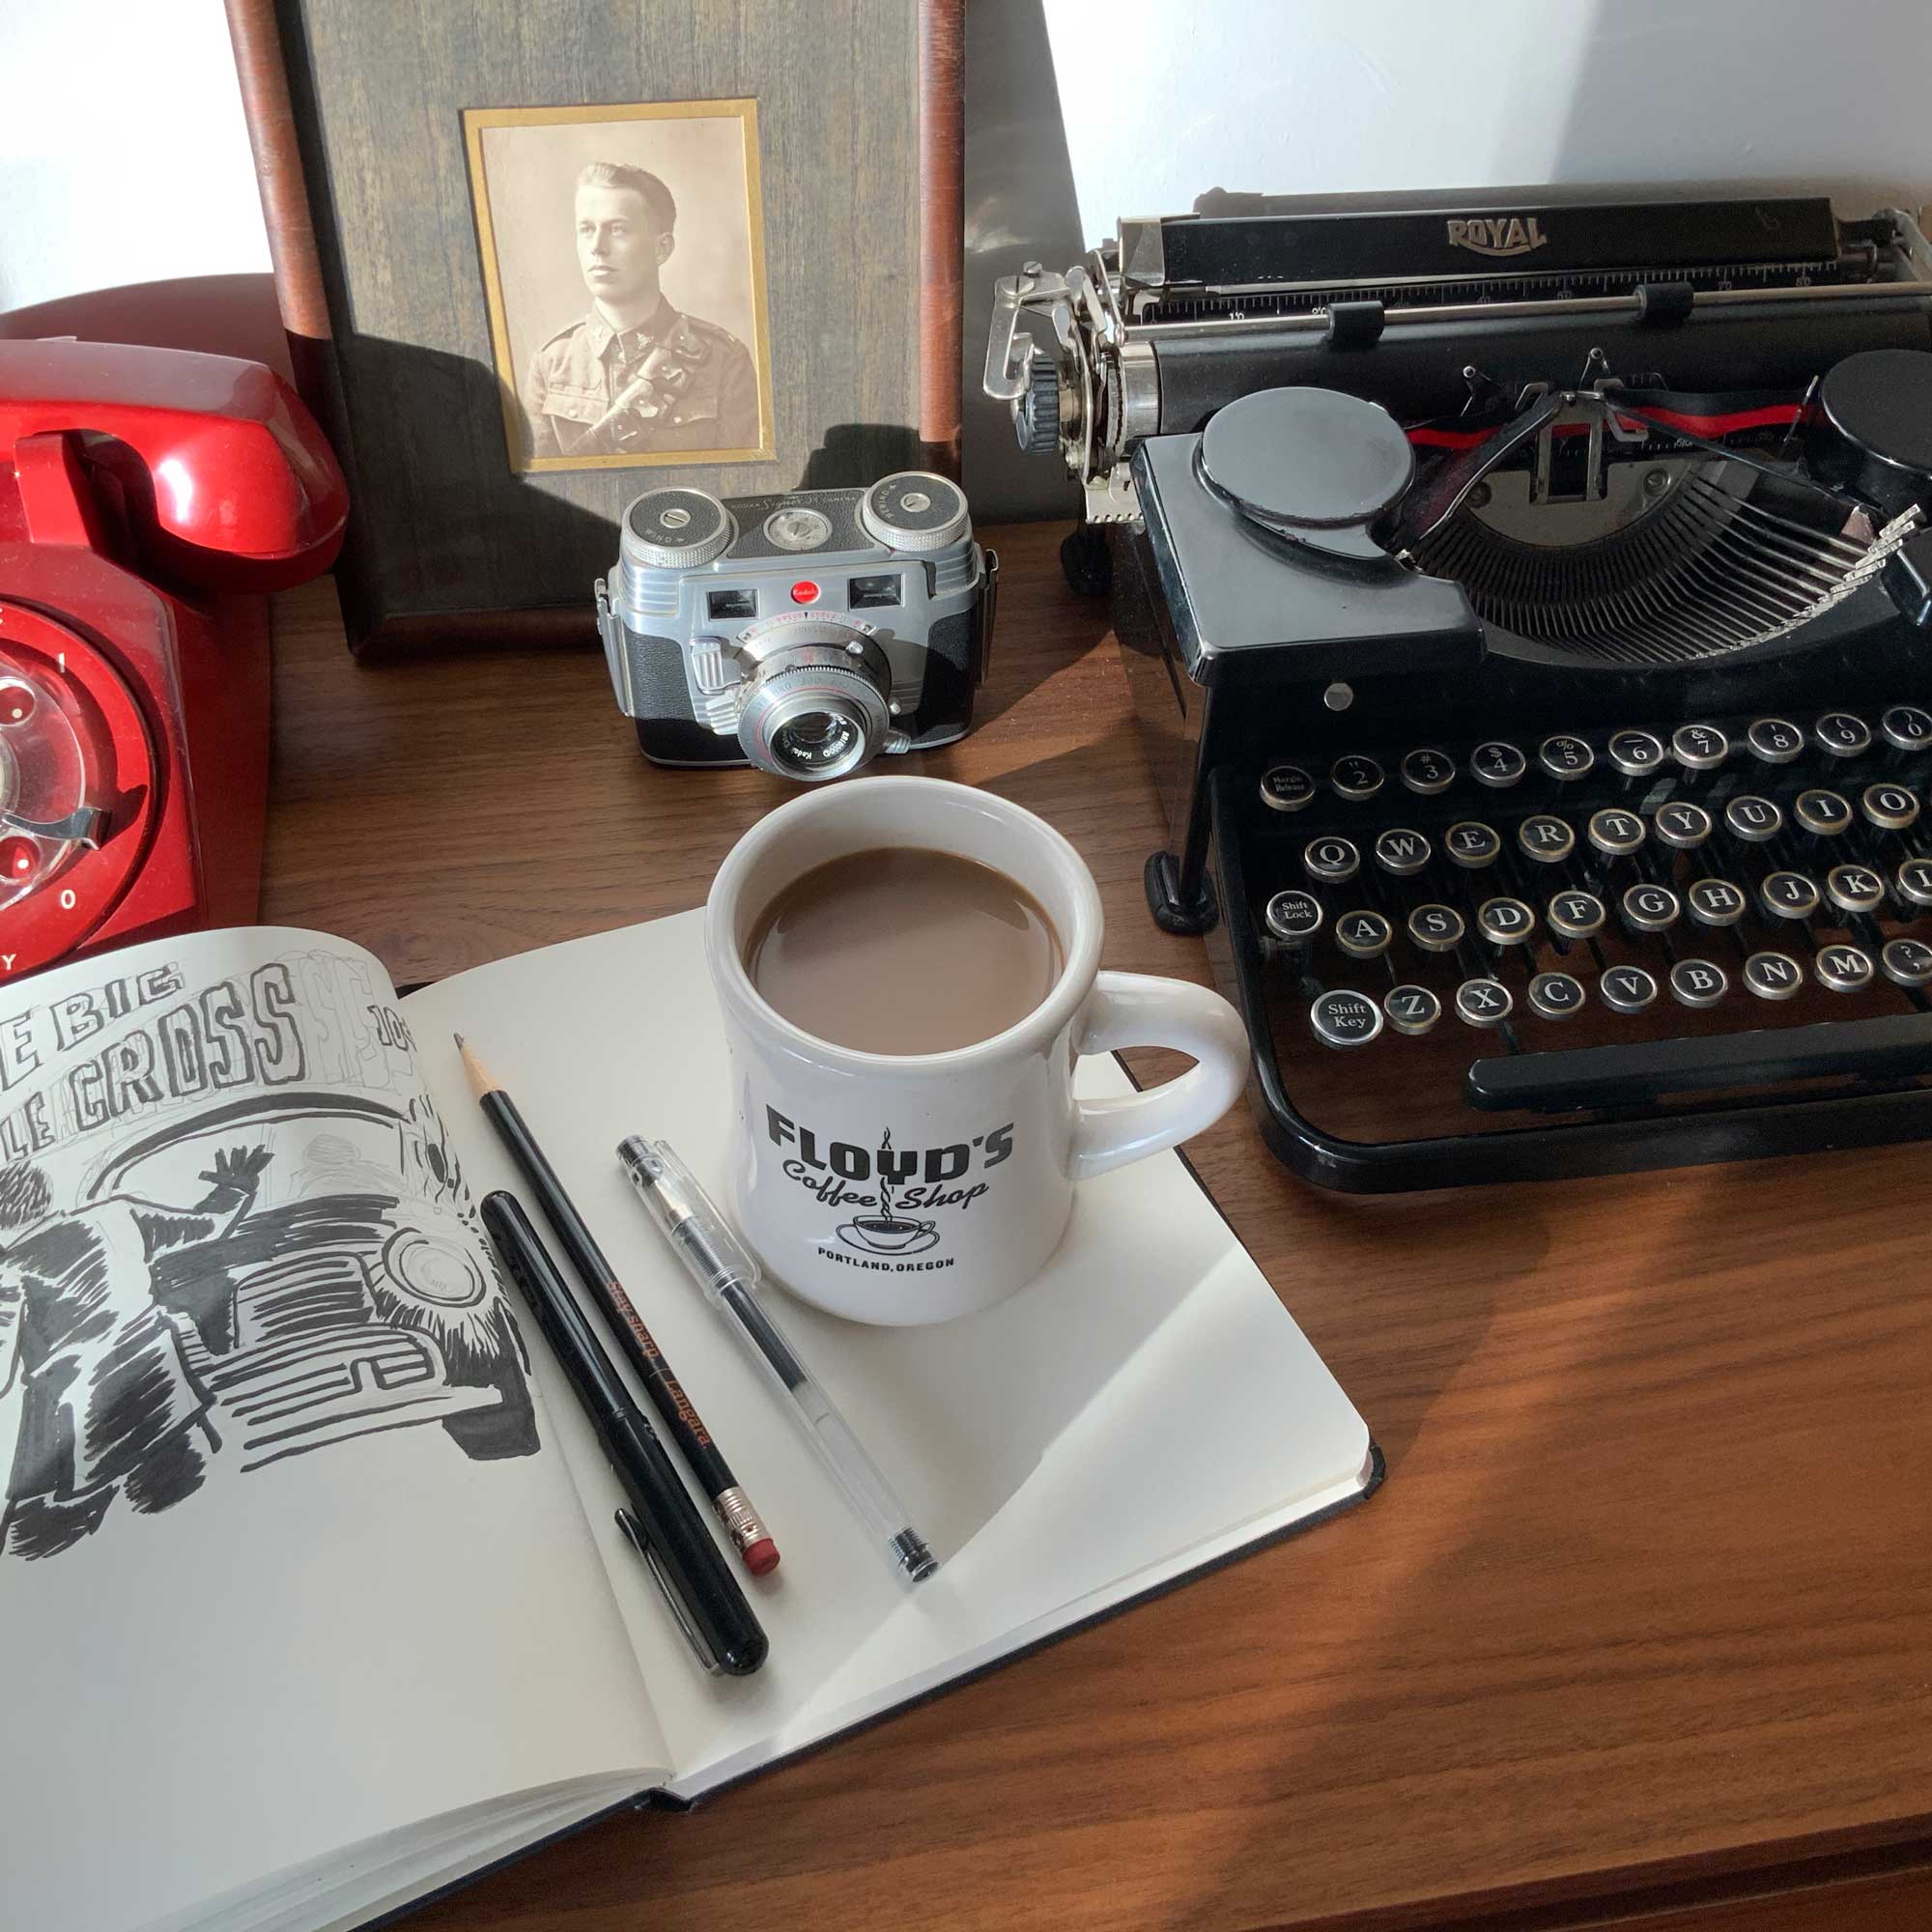 Photo fo sketchbook, a coffee cup, old camera and an old Royal typewriter.